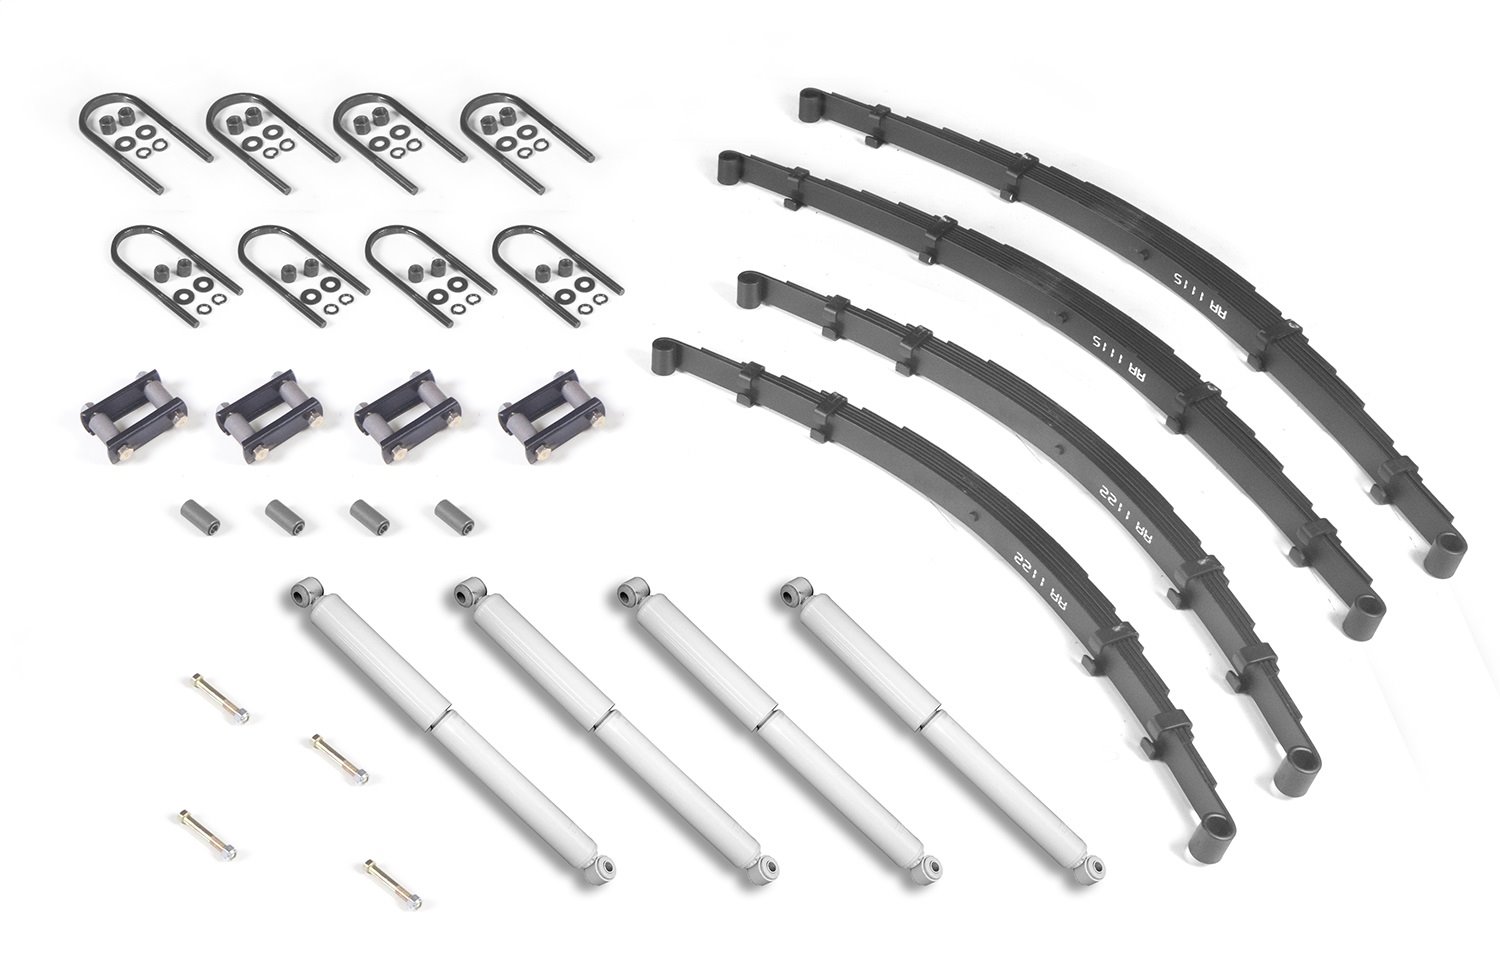 This suspension master rebuilders kit from Omix-ADA fits 52-57 domestic Willys M38-A1s and 58-71 export Willys M38-A1s.